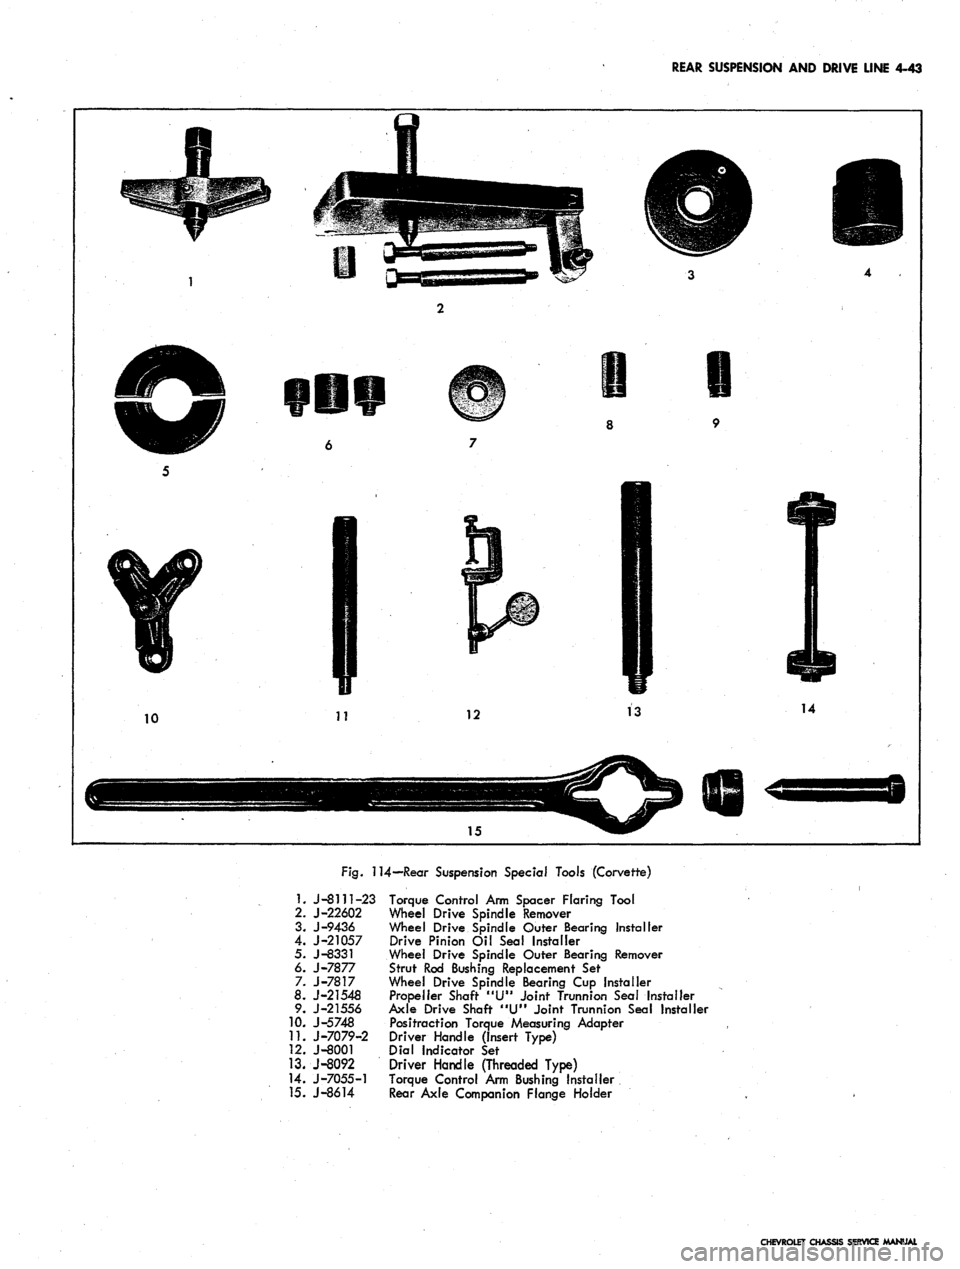 CHEVROLET CAMARO 1967 1.G Chassis Workshop Manual 
REAR SUSPENSION AND DRIVE LINE 4-43

Fig.
 114—Rear Suspension Special Tools (Corvette)

1.
 J-8111-23 Torque Control Arm Spacer Flaring Tool

2.
 J-22602 Wheel Drive Spindle Remover

3.
 J-9436 Wh